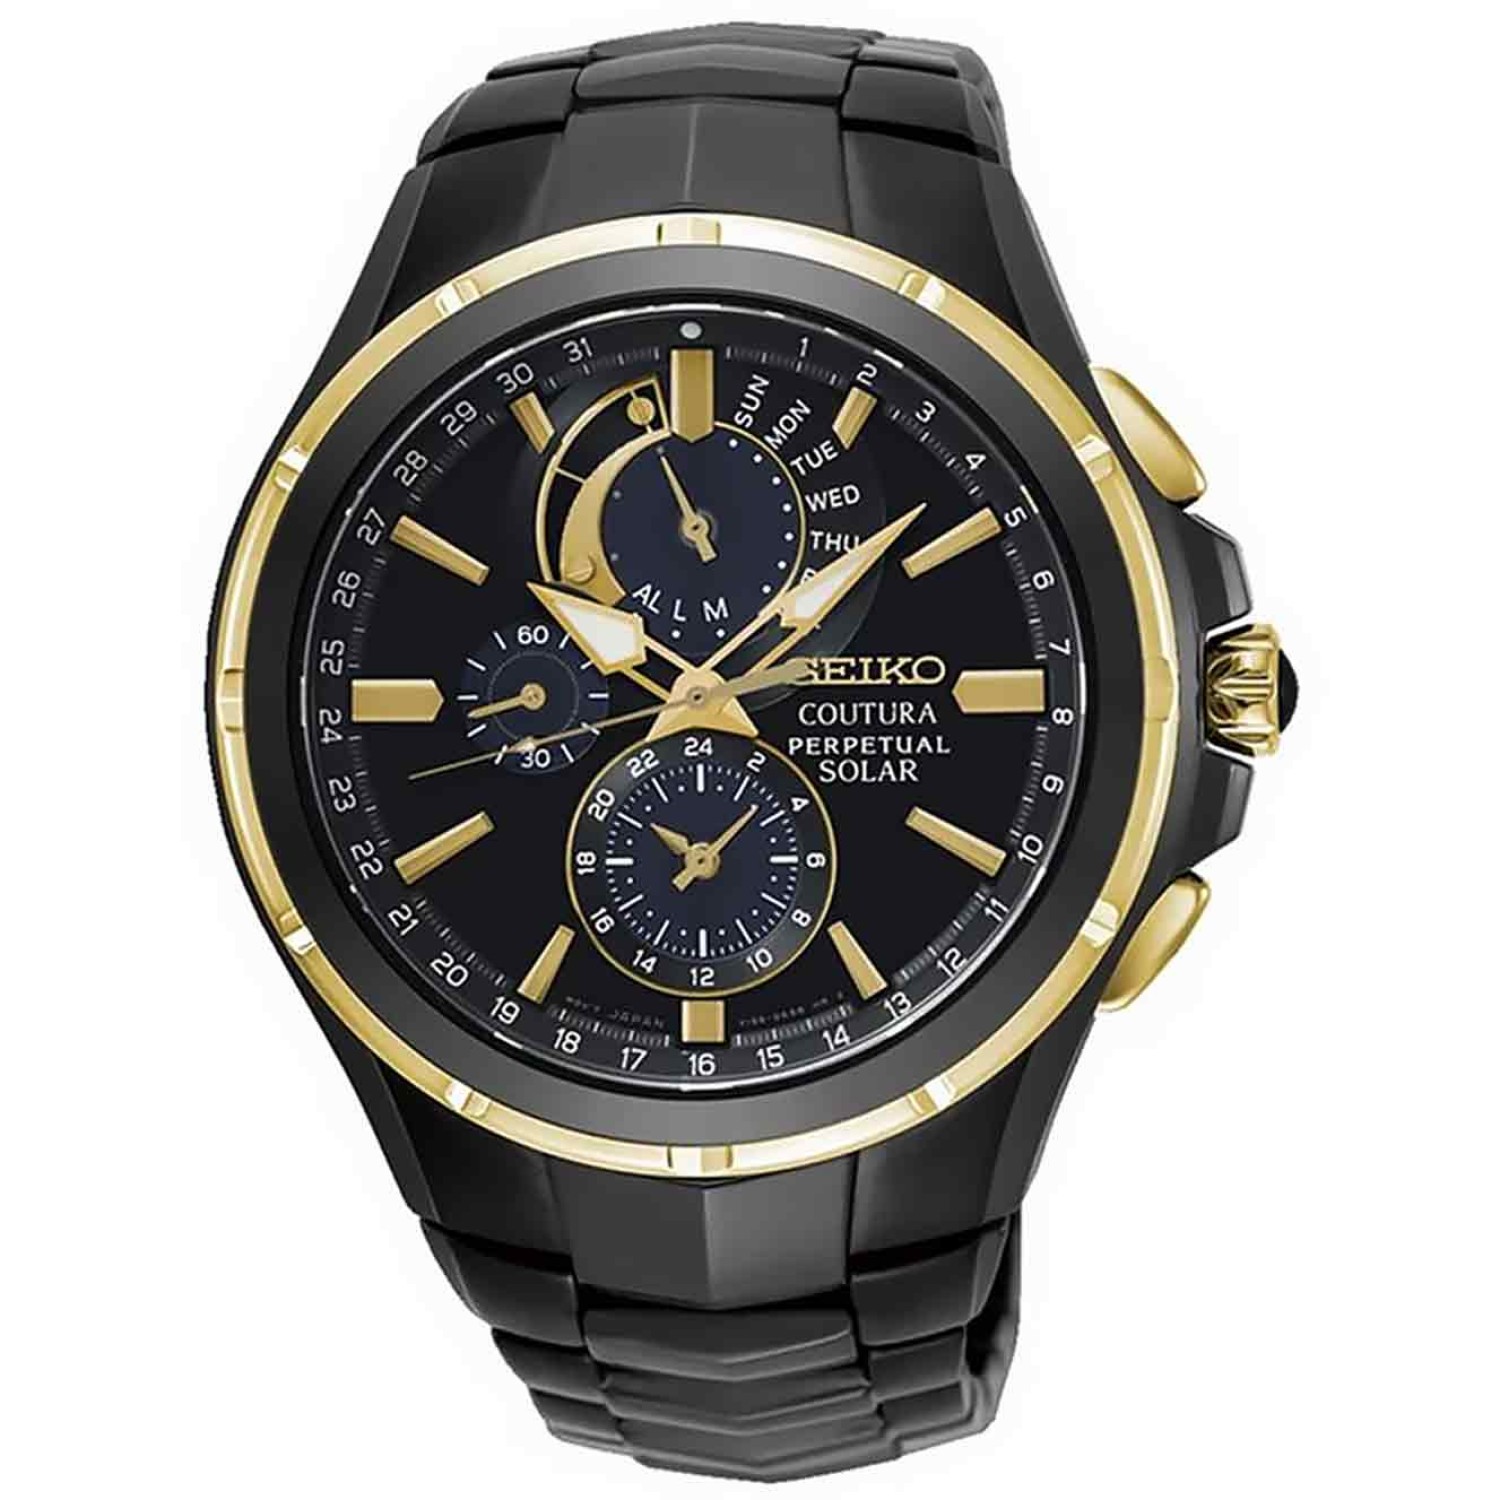 SSC698P-1 SEIKO Coutura Solar Sapphire Watch. Available online or  at your Seiko Watch Specialist  - Christies Papatoetoe and Watch Station Manukau.   3 Months No Payments and Interest for Q Card holders LAYBUY - Pay it easy, in 6 weekl @christies.online